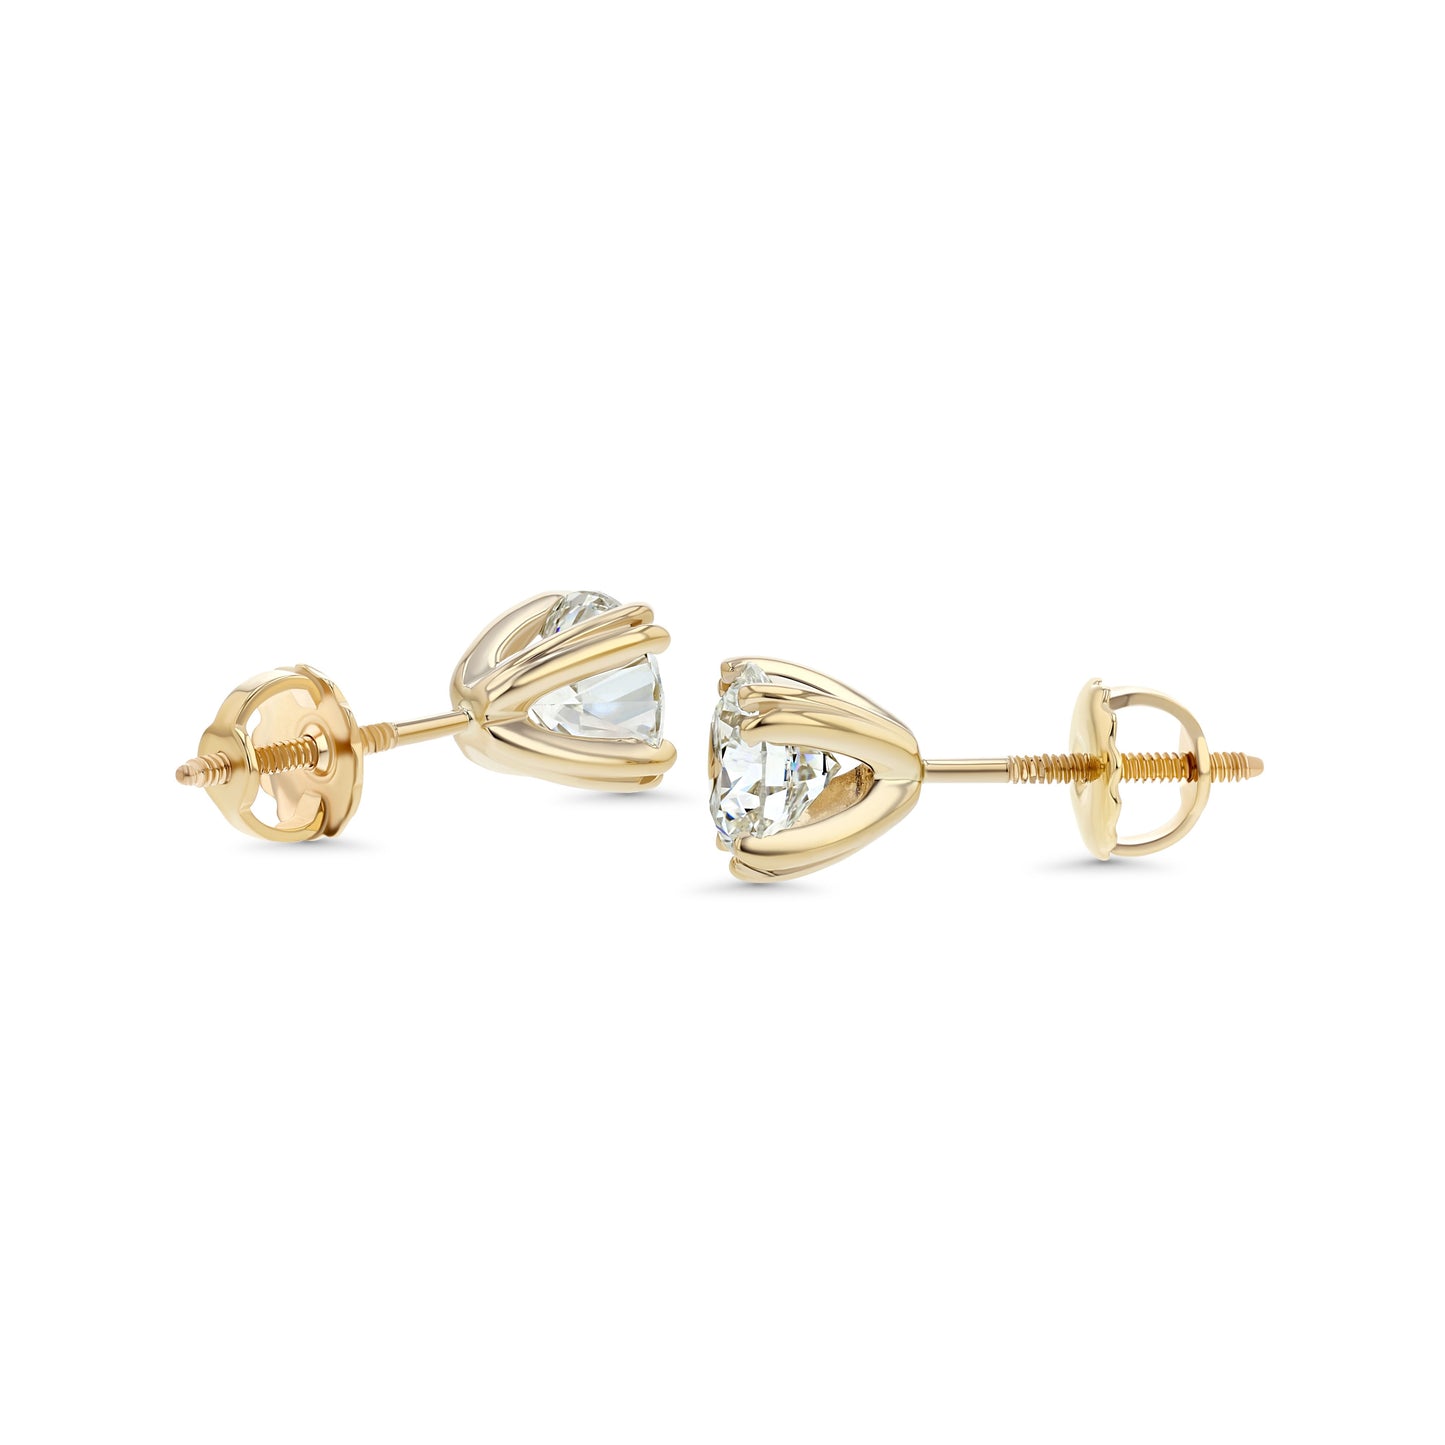 18k Yellow Gold 8-prong Round Brilliant Diamond Stud Earrings (1 Ct. T.w., Si1-si2 Clarity, J-k Color)